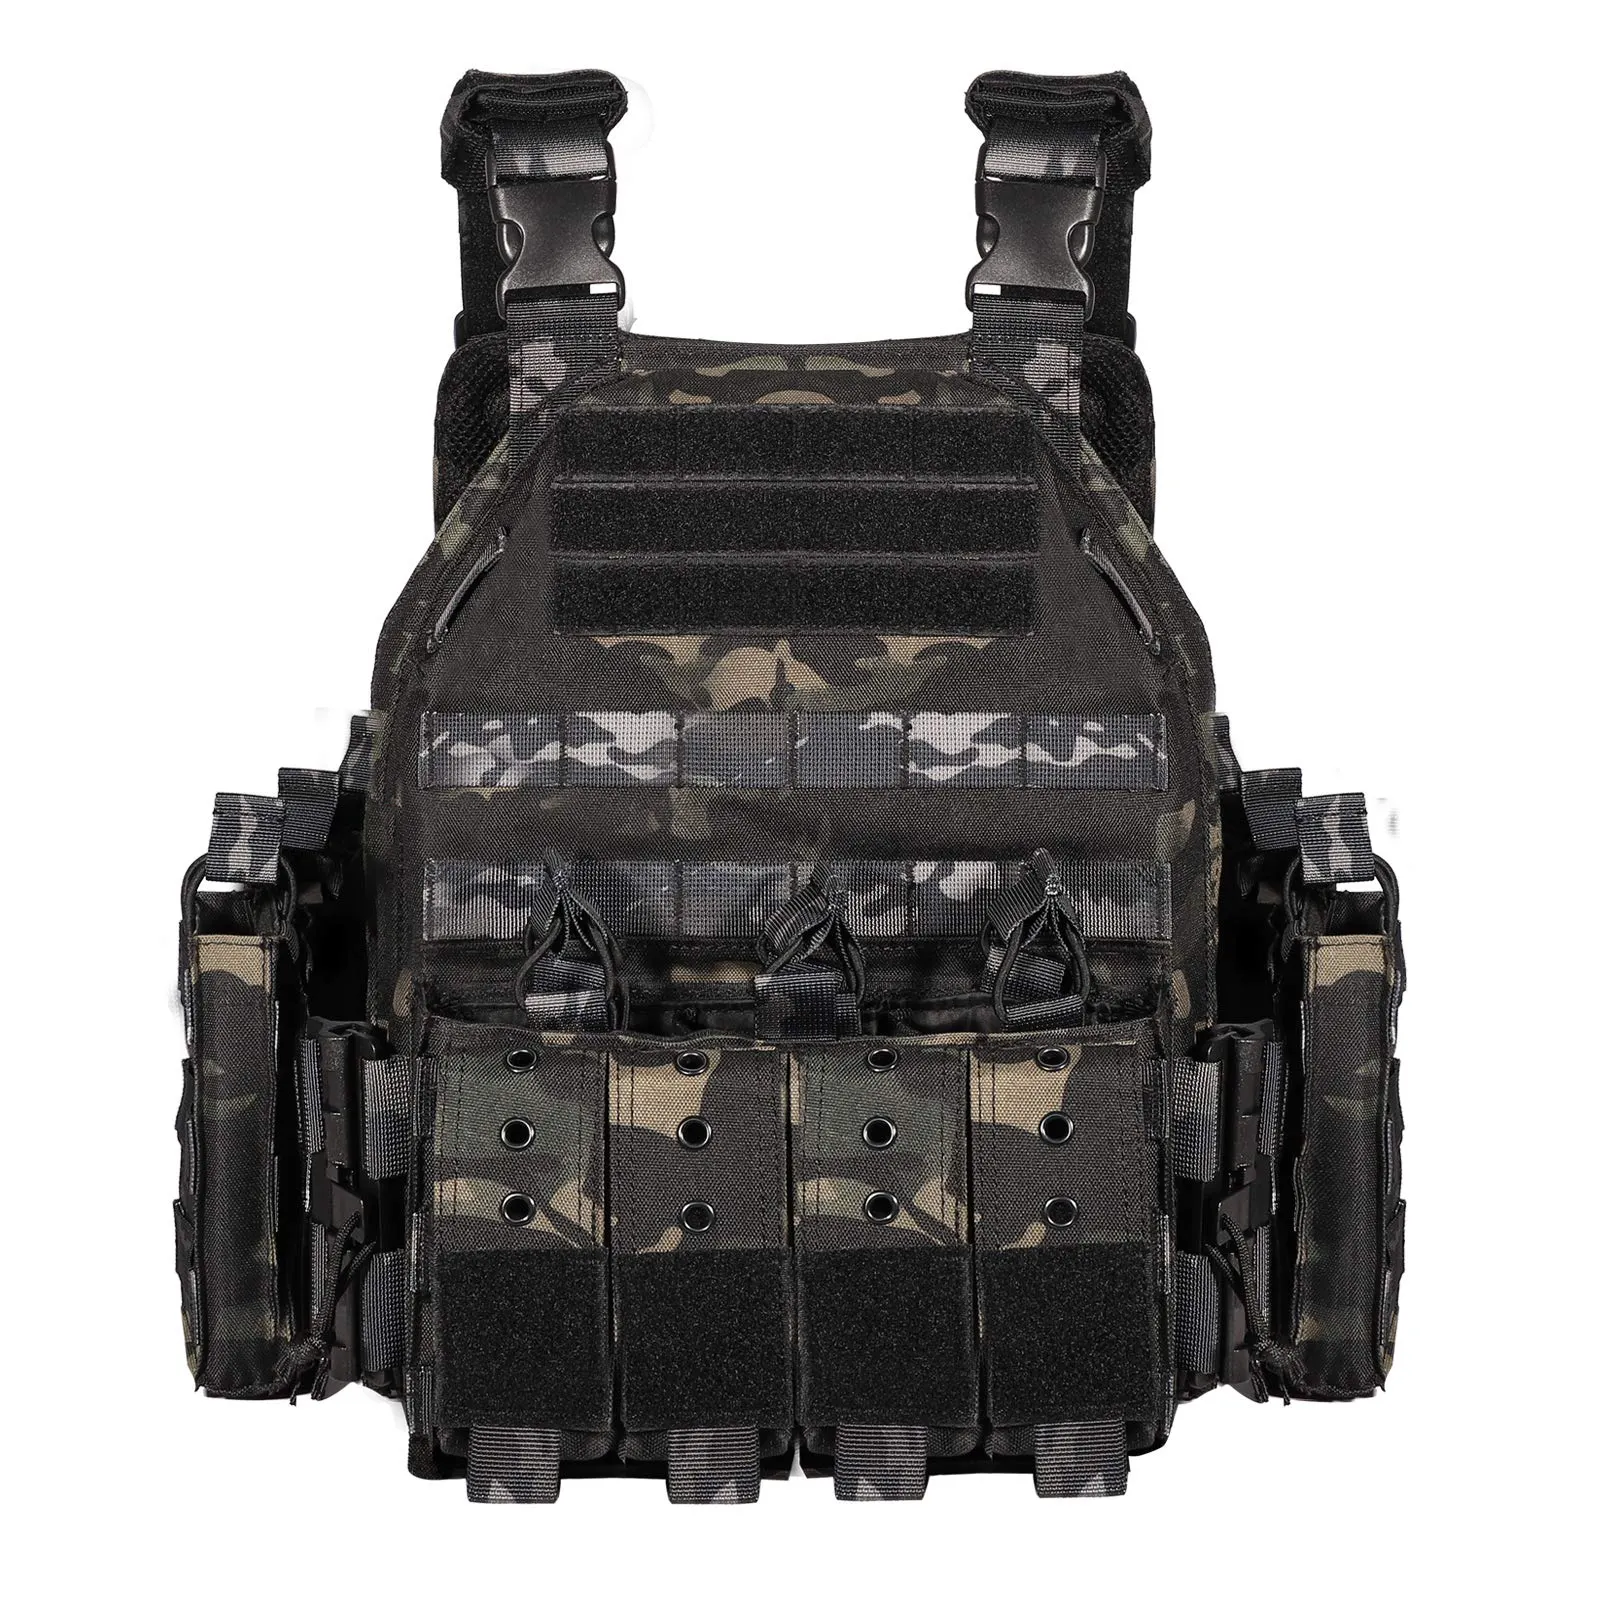 Black camouflage vest 1000D High quality outdoor training vest Waterproof and comfortable tactical vest